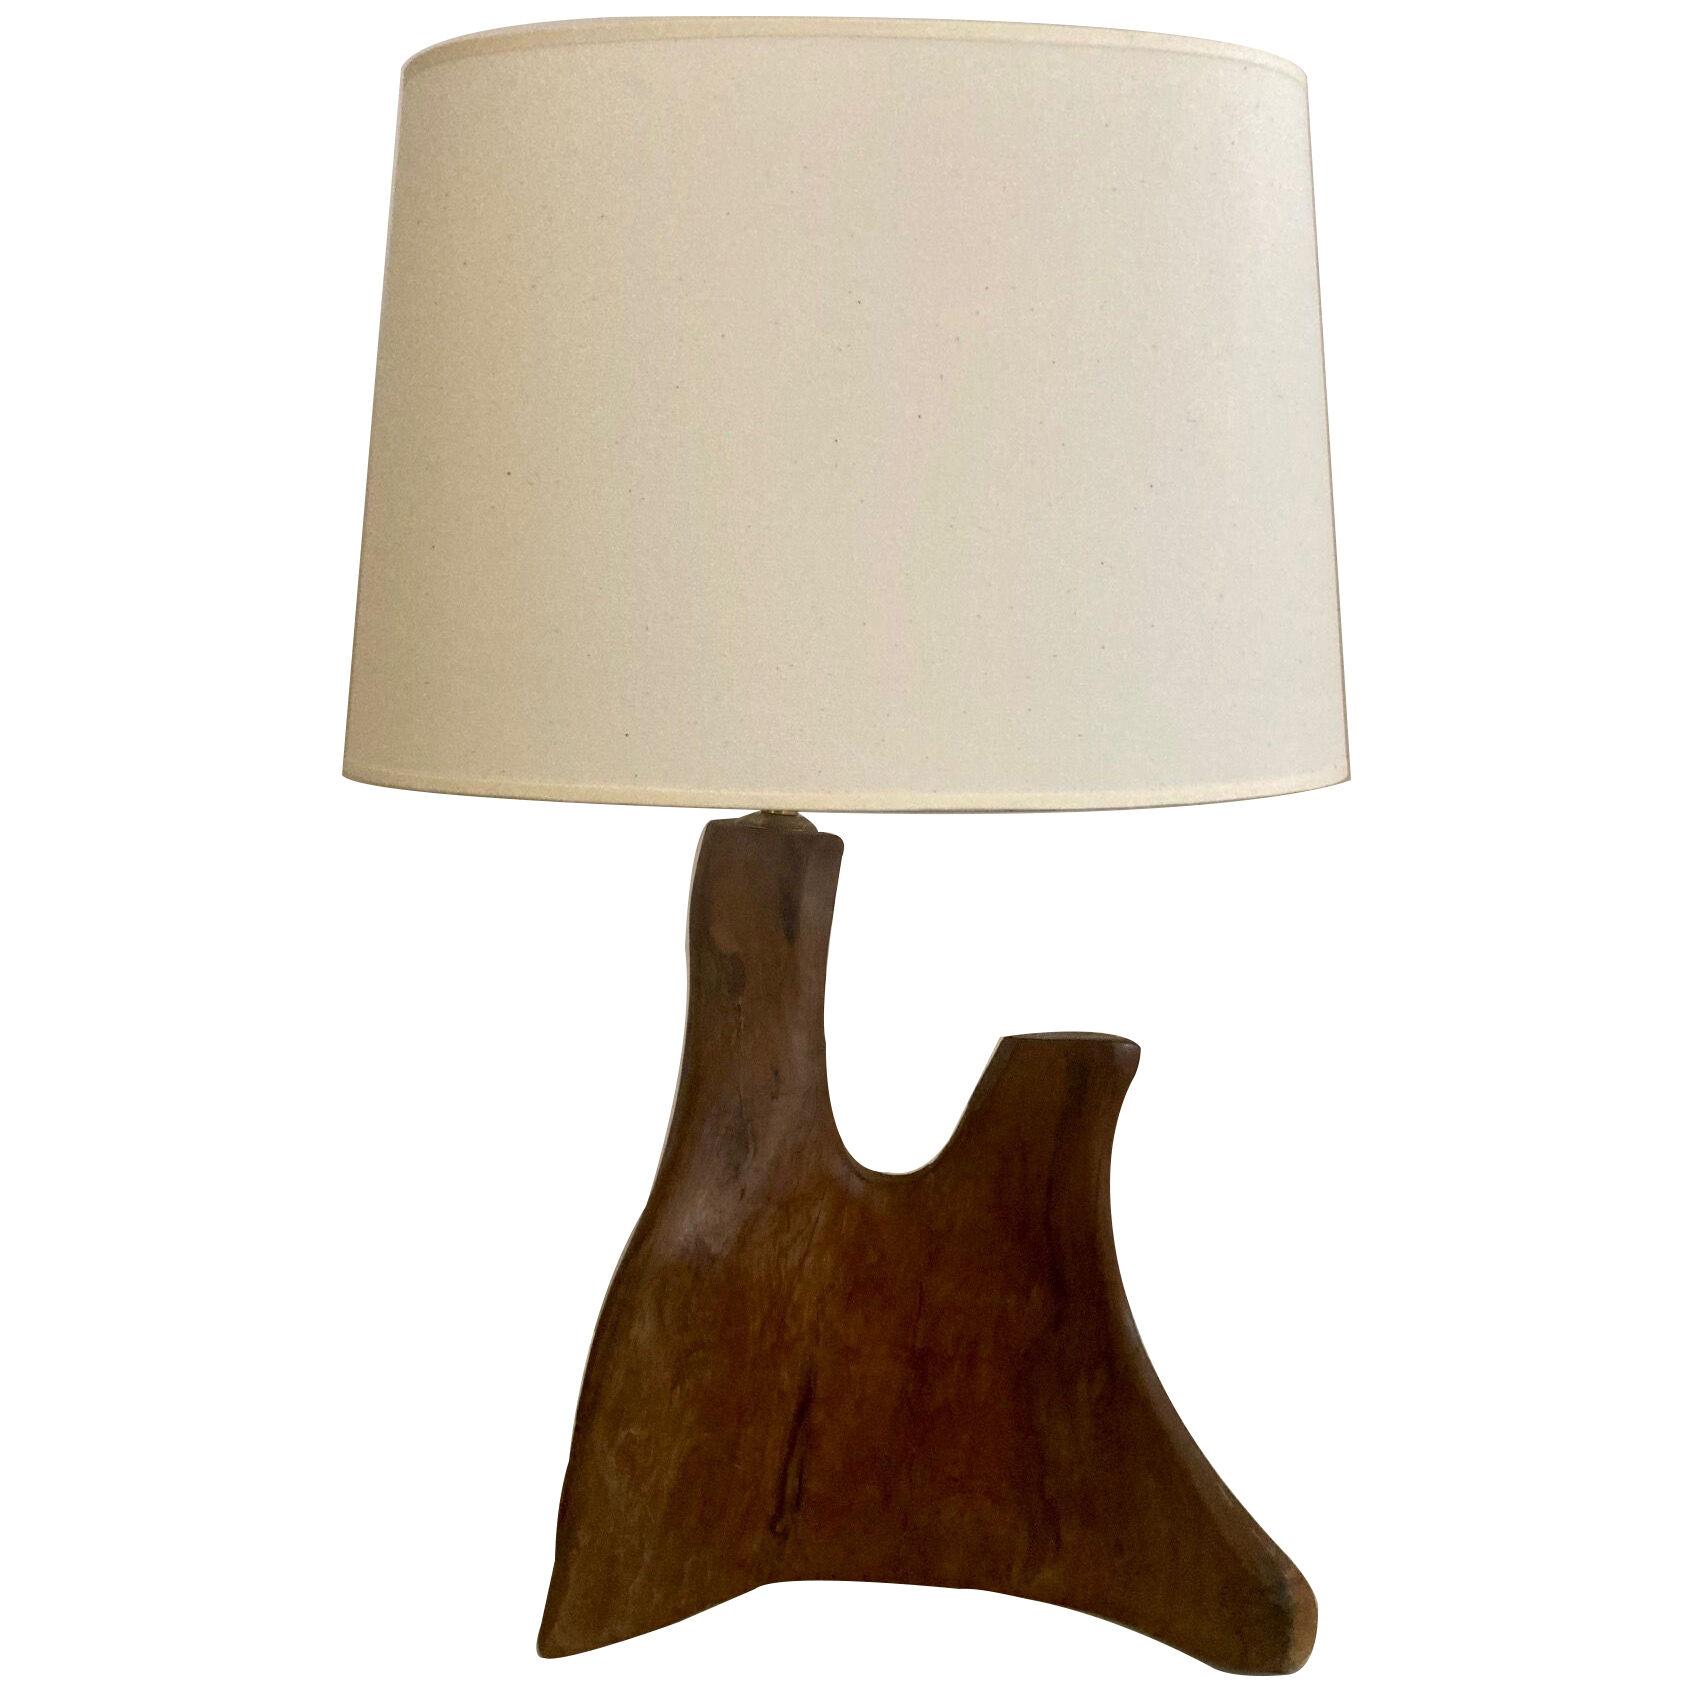 Olive Wood Table Lamp, France, 1950’s